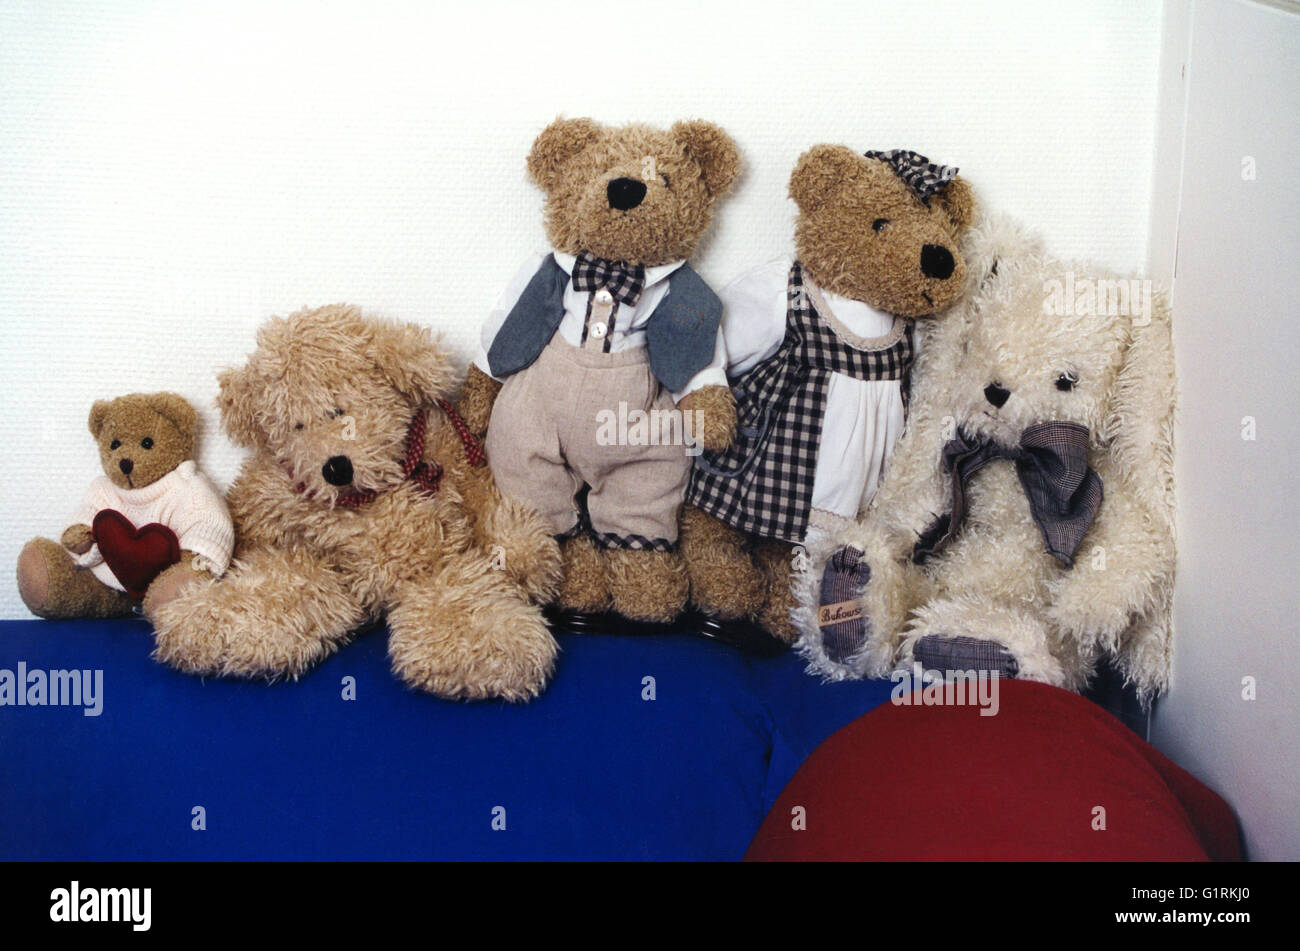 Teddy bears in different versions Stock Photo